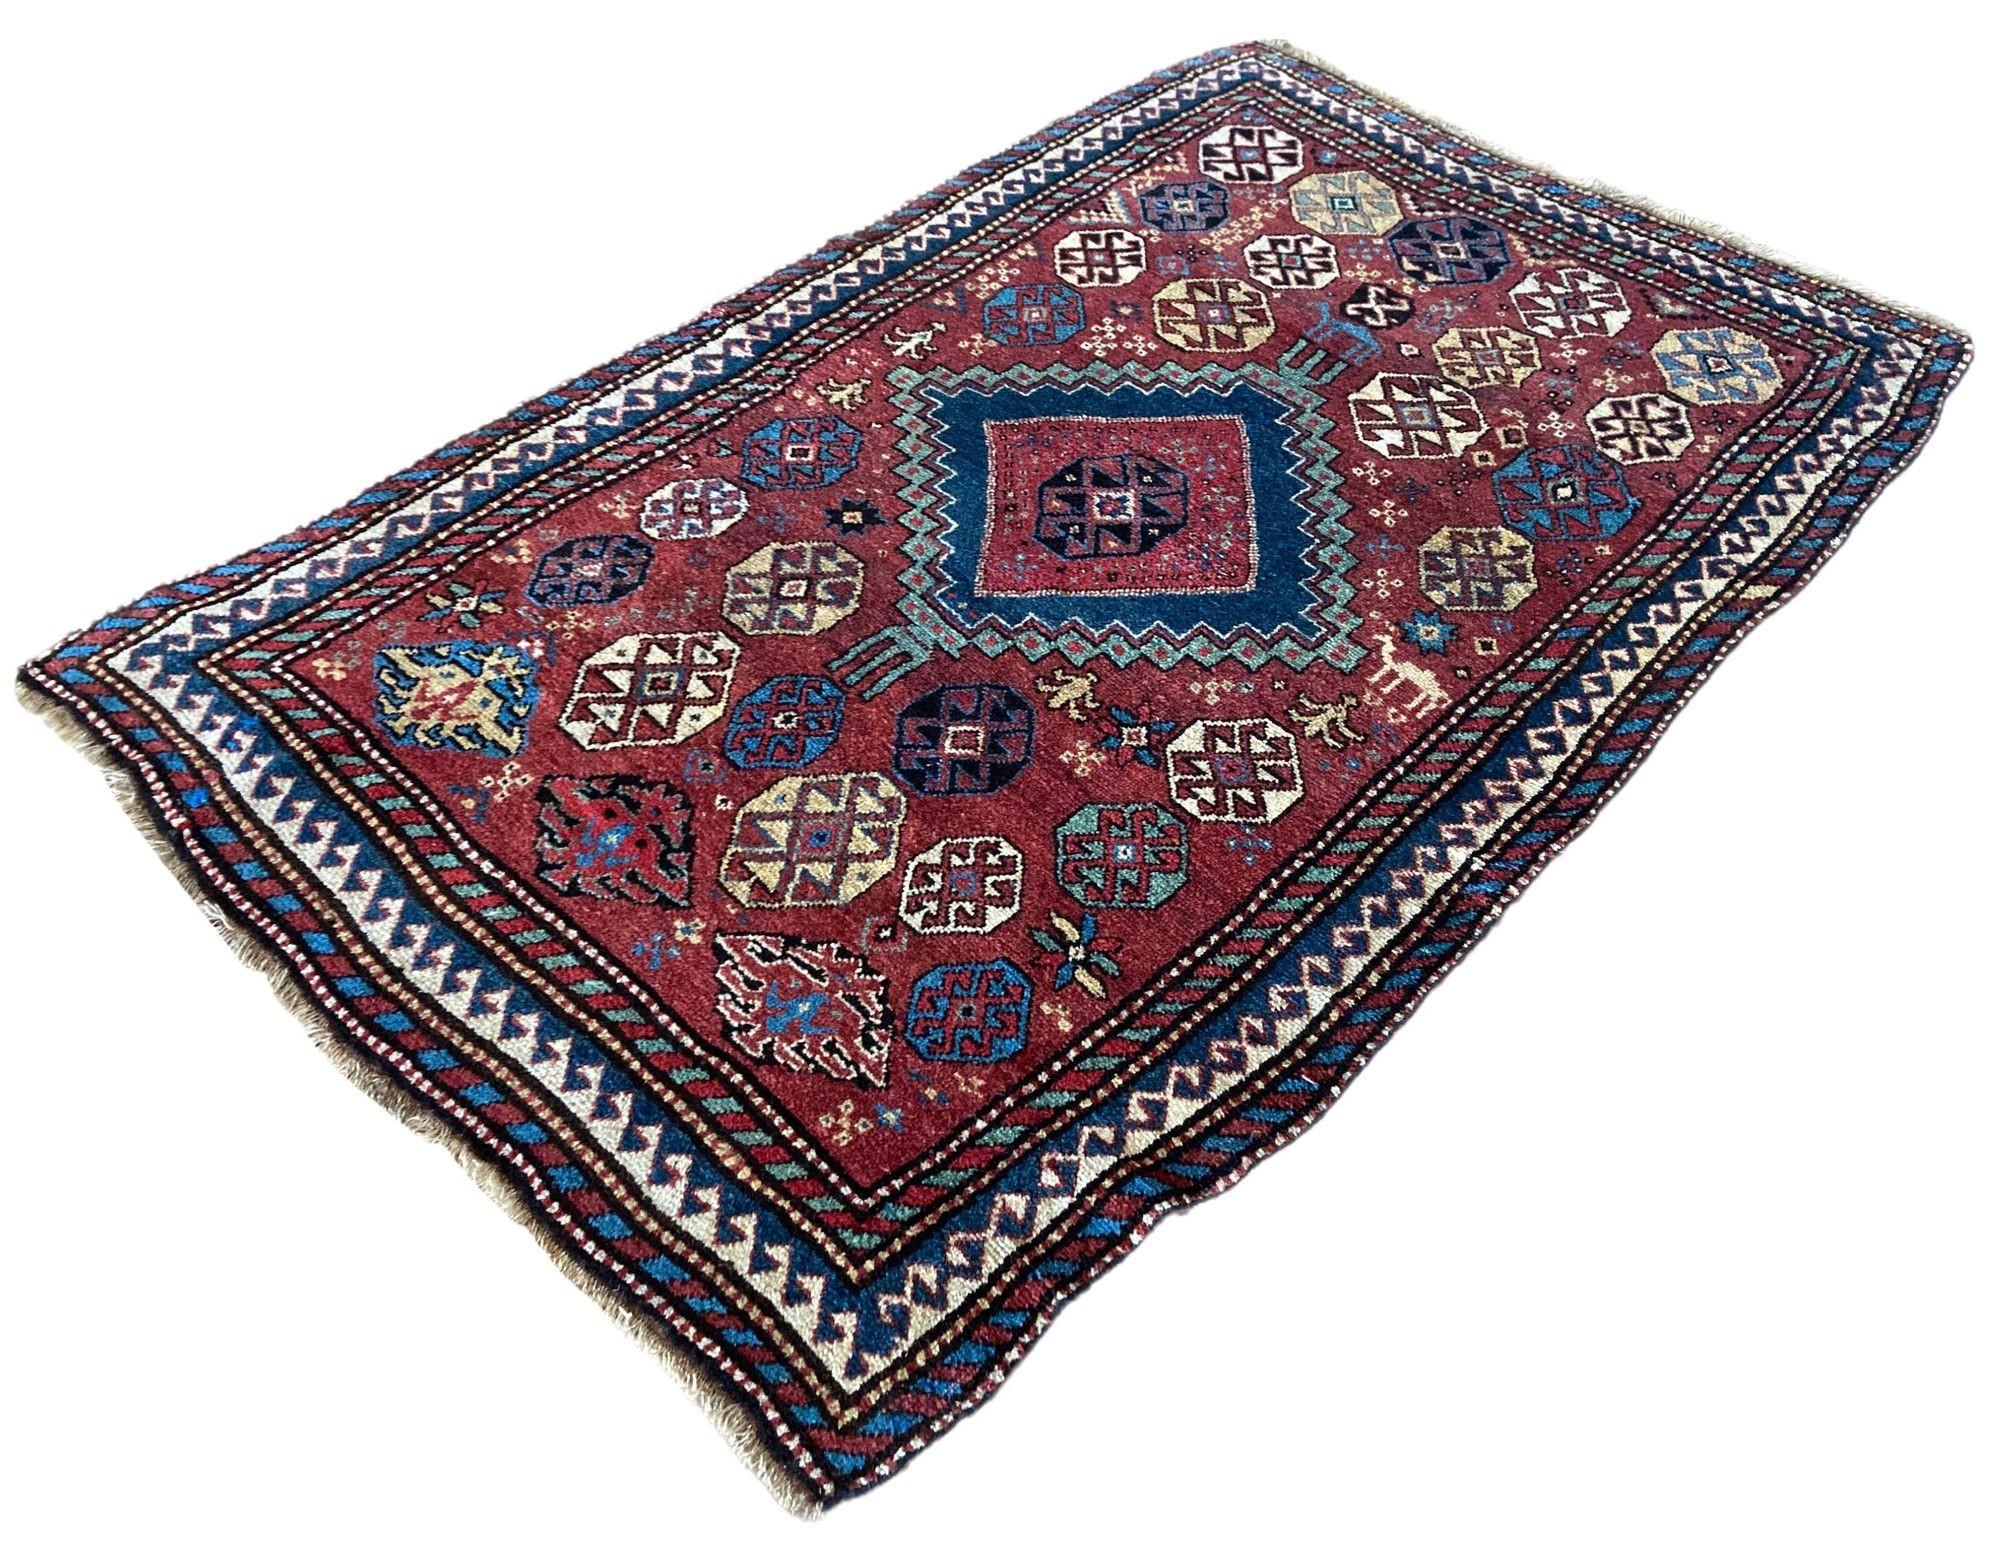 Antique Kurdish Rug 2.20m x 1.33m In Good Condition For Sale In St. Albans, GB